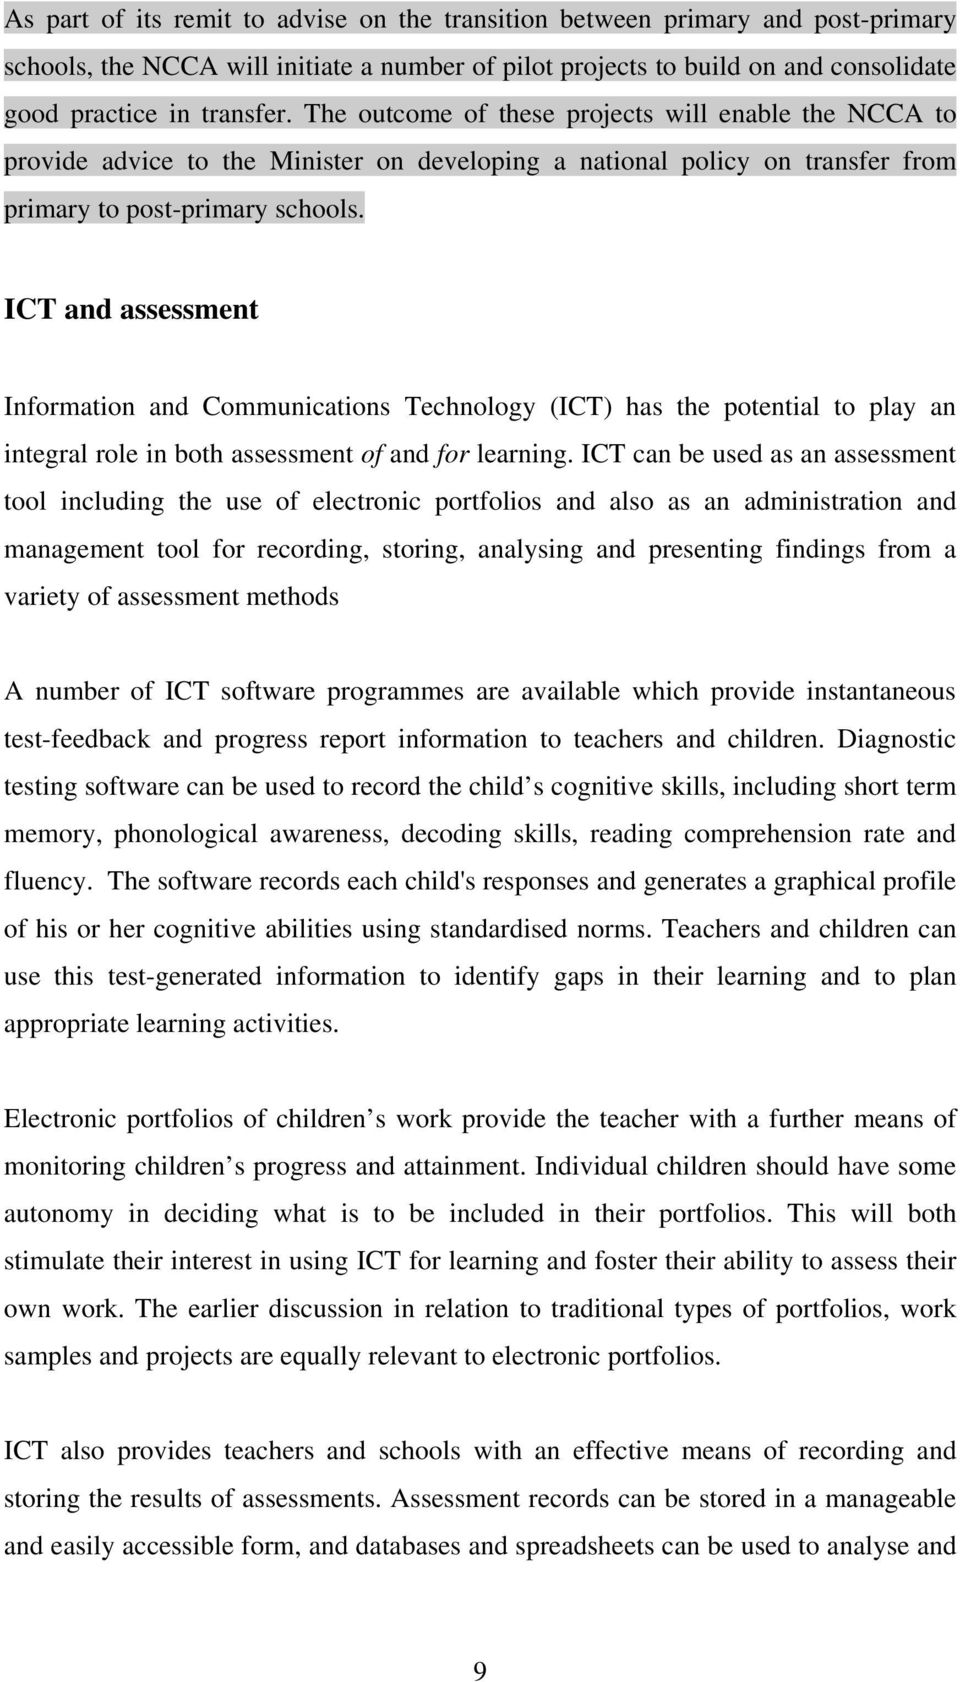 ICT and assessment Information and Communications Technology (ICT) has the potential to play an integral role in both assessment of and for learning.